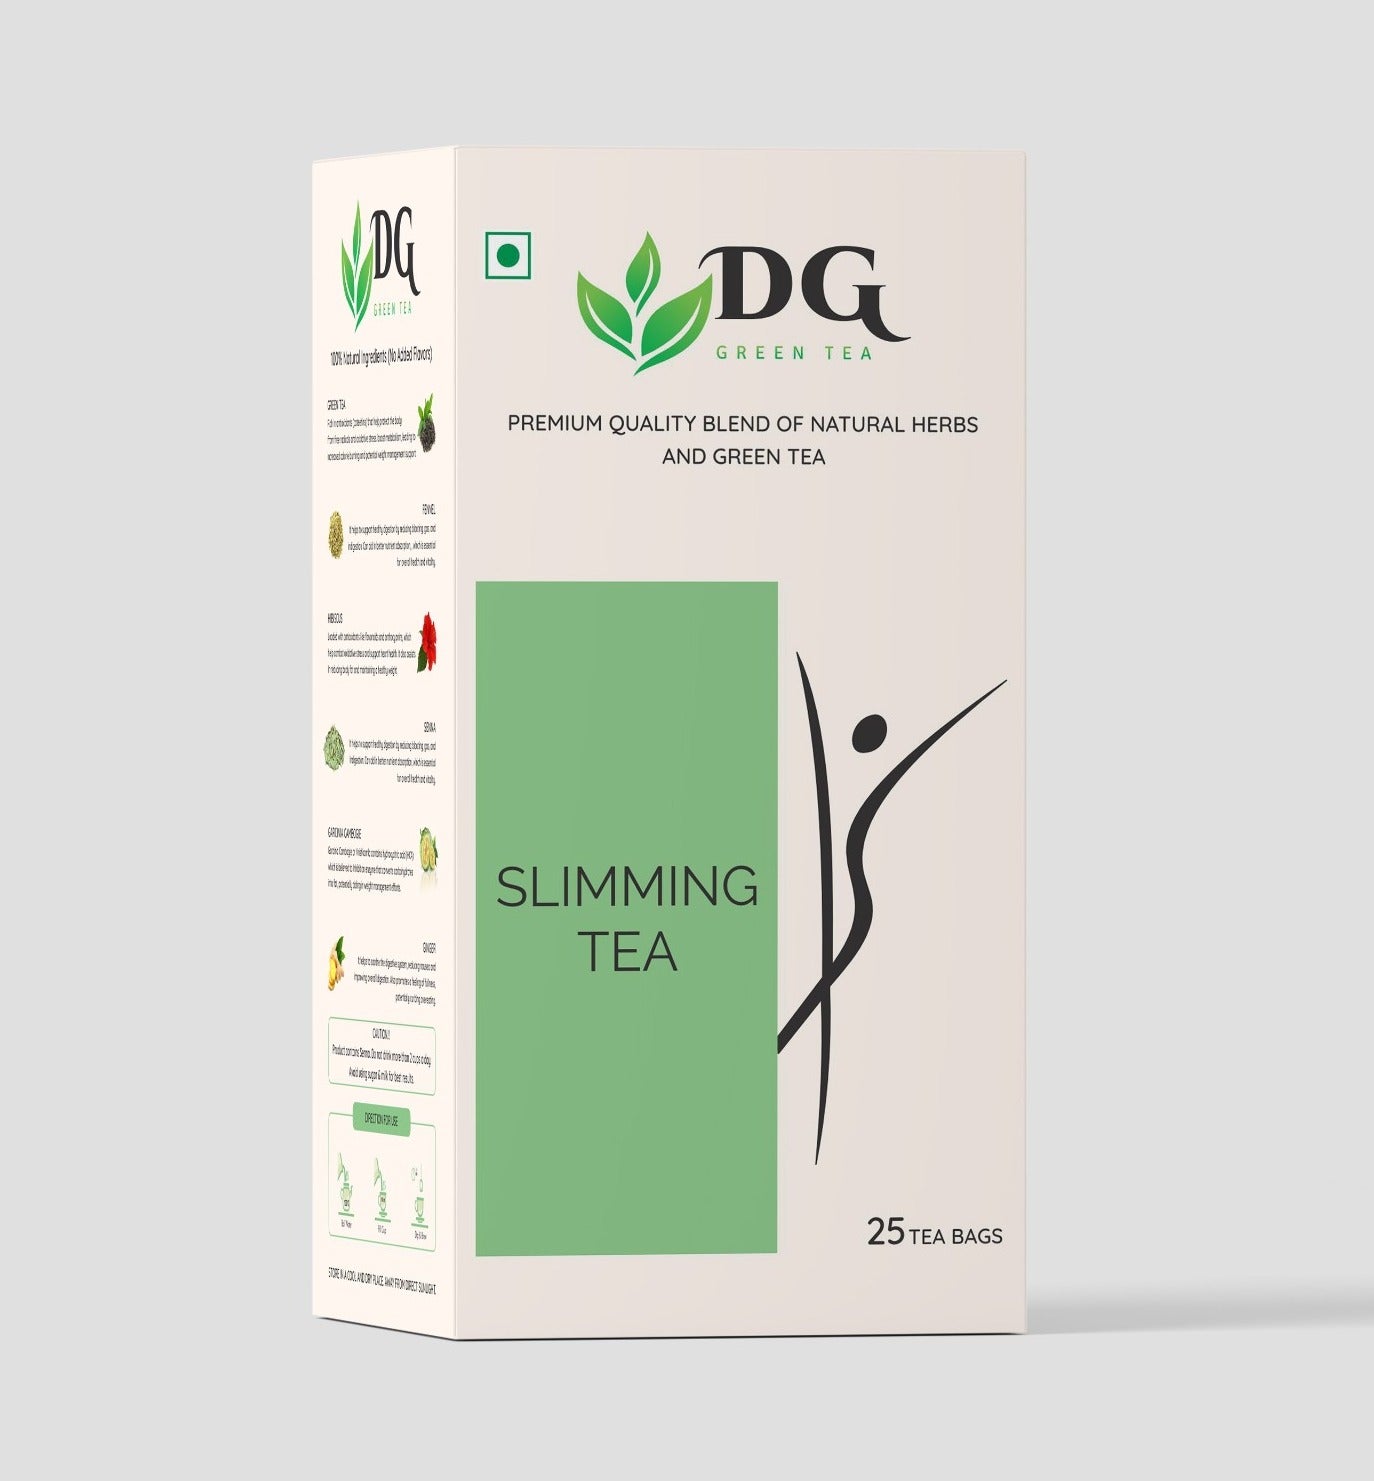 DG Herbal Slimming Green Tea: Boost Digestion, Manage Weight made with Natural Herbs - Yipisale Product - 25 Tea Bags